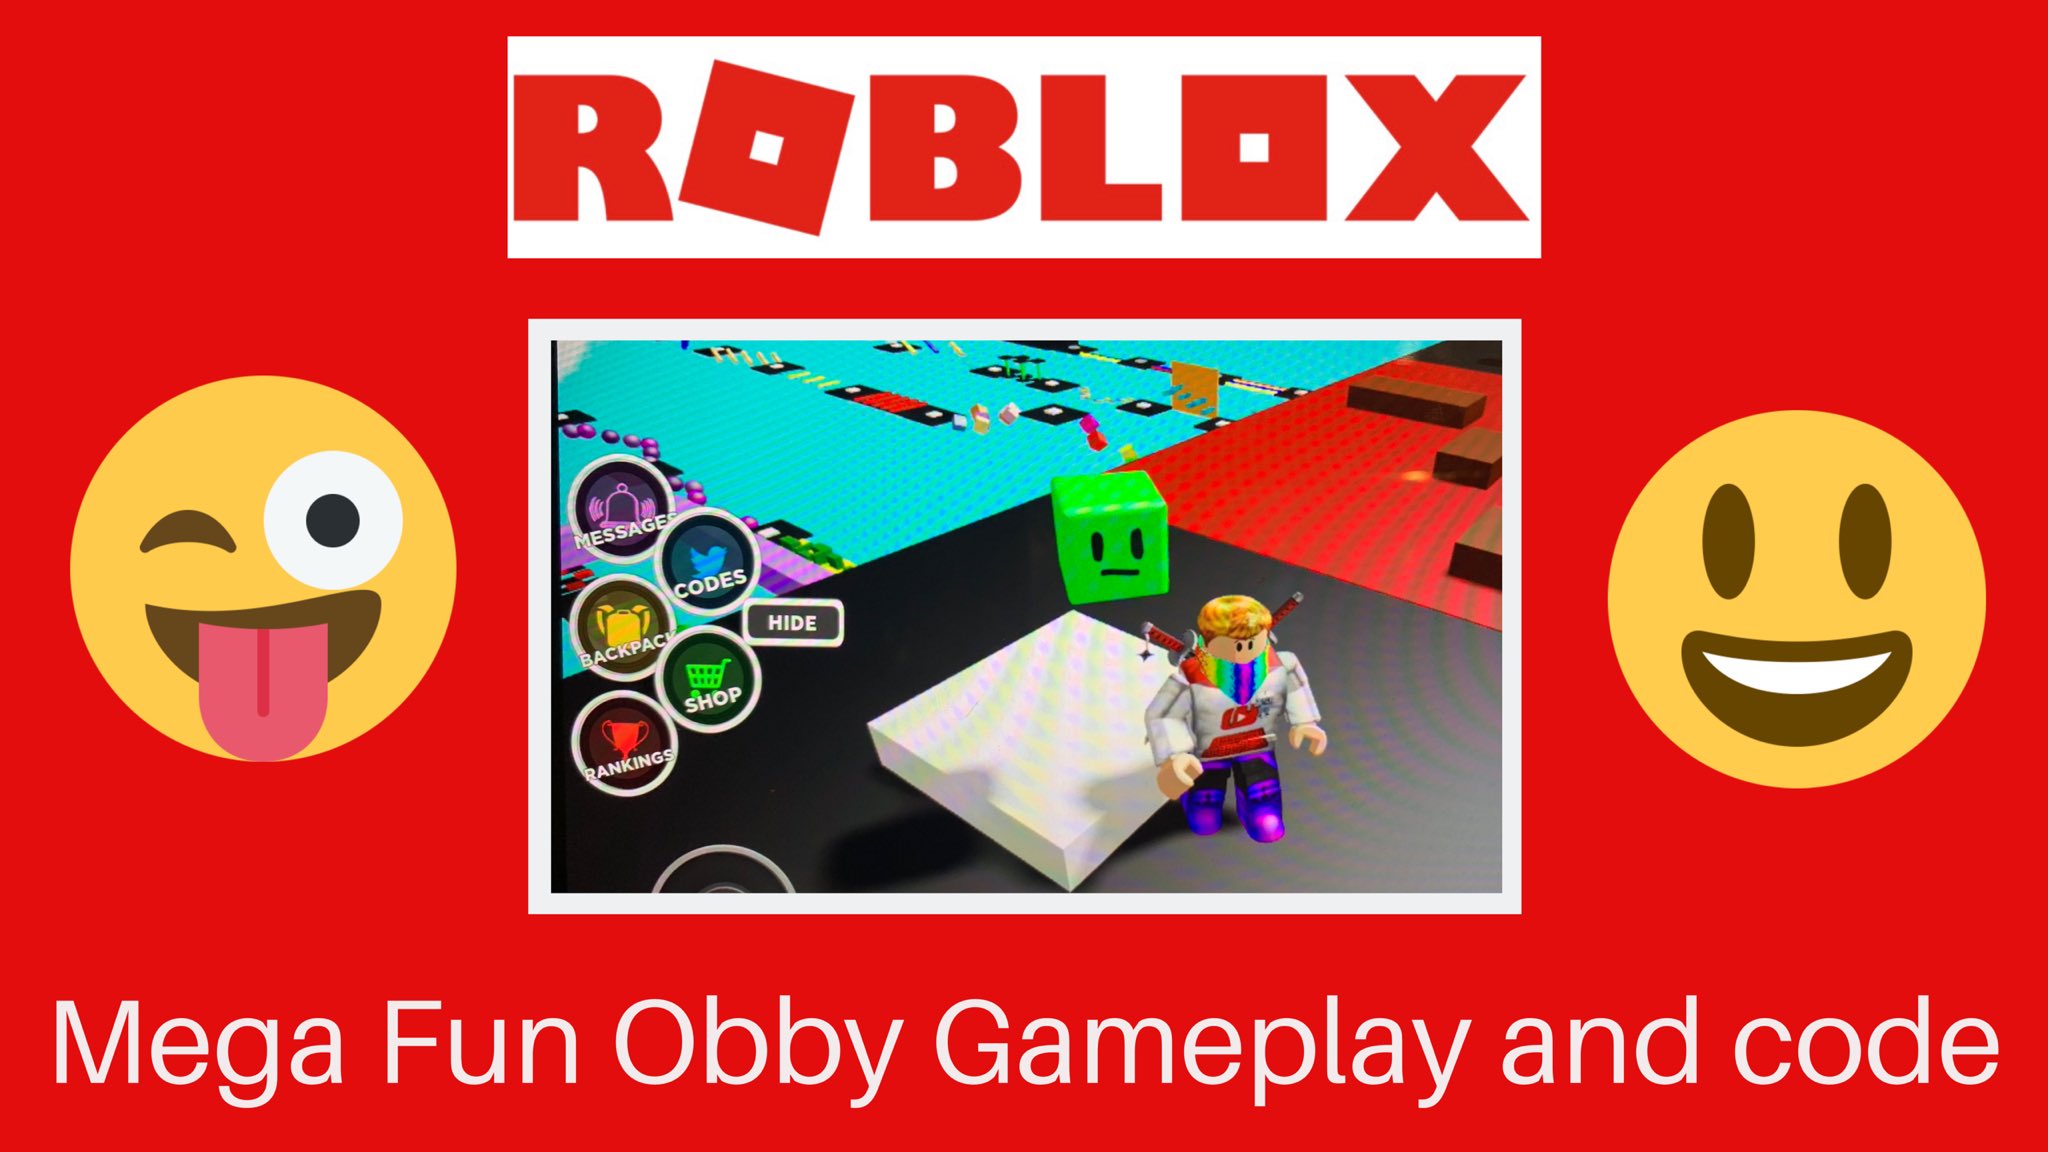 Deathbotbrothers On Twitter Roblox Mega Fun Obby Gameplay And Code Gameplay Talk Through And A Co Https T Co Qcyqb3ibze Via Youtube Roblox Megafunobby Robloxmegafunobby Robloxcode Robloxgameplay Robloxgames Https T Co Hdiriznsxu - codes roblox mega fun obby